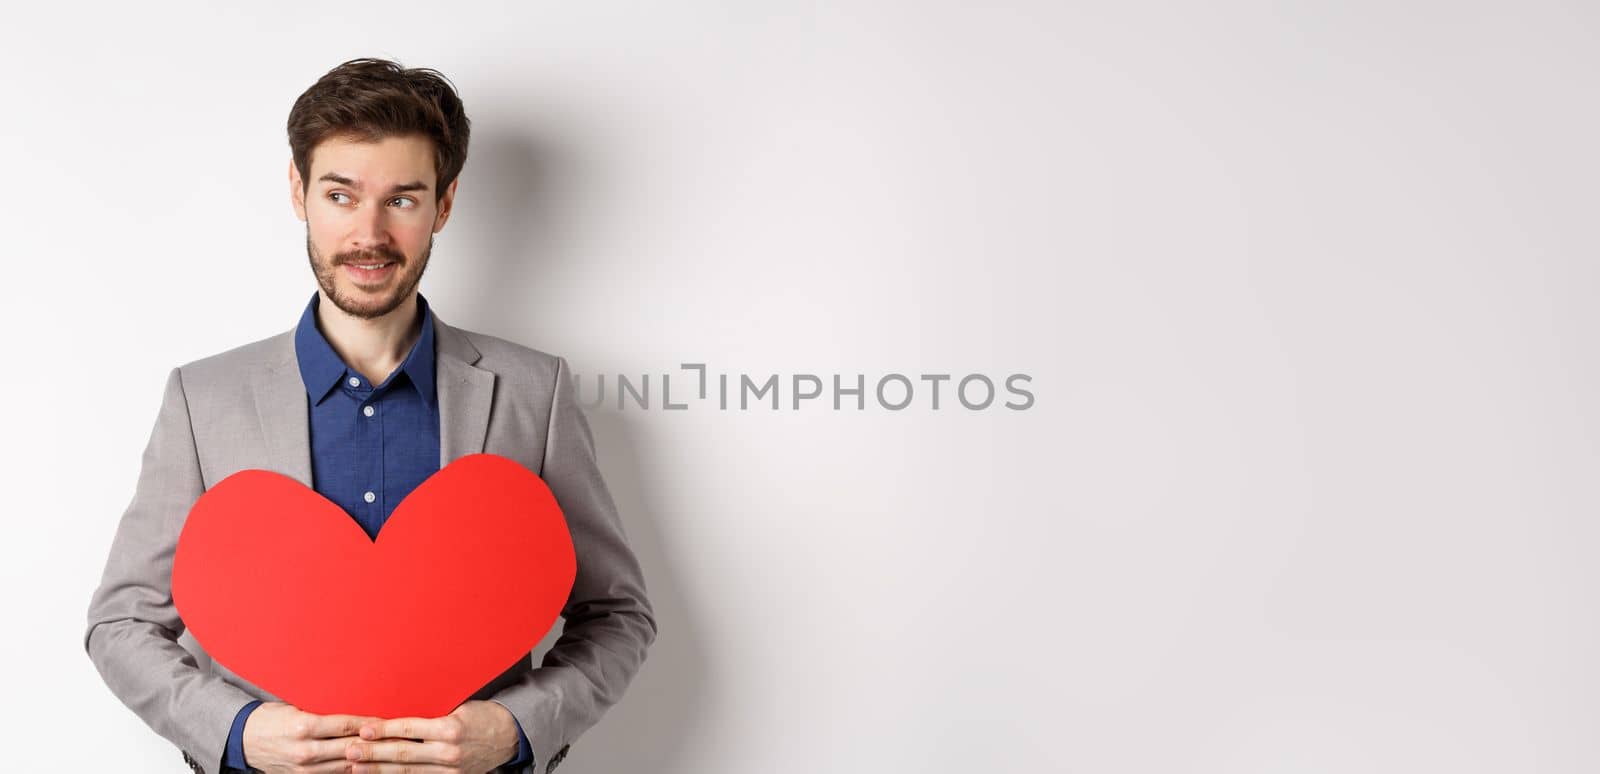 Attractive man in suit looking left and smiling, holding red heart cutout, prepare valentines day surprise for lover, standing over white background.